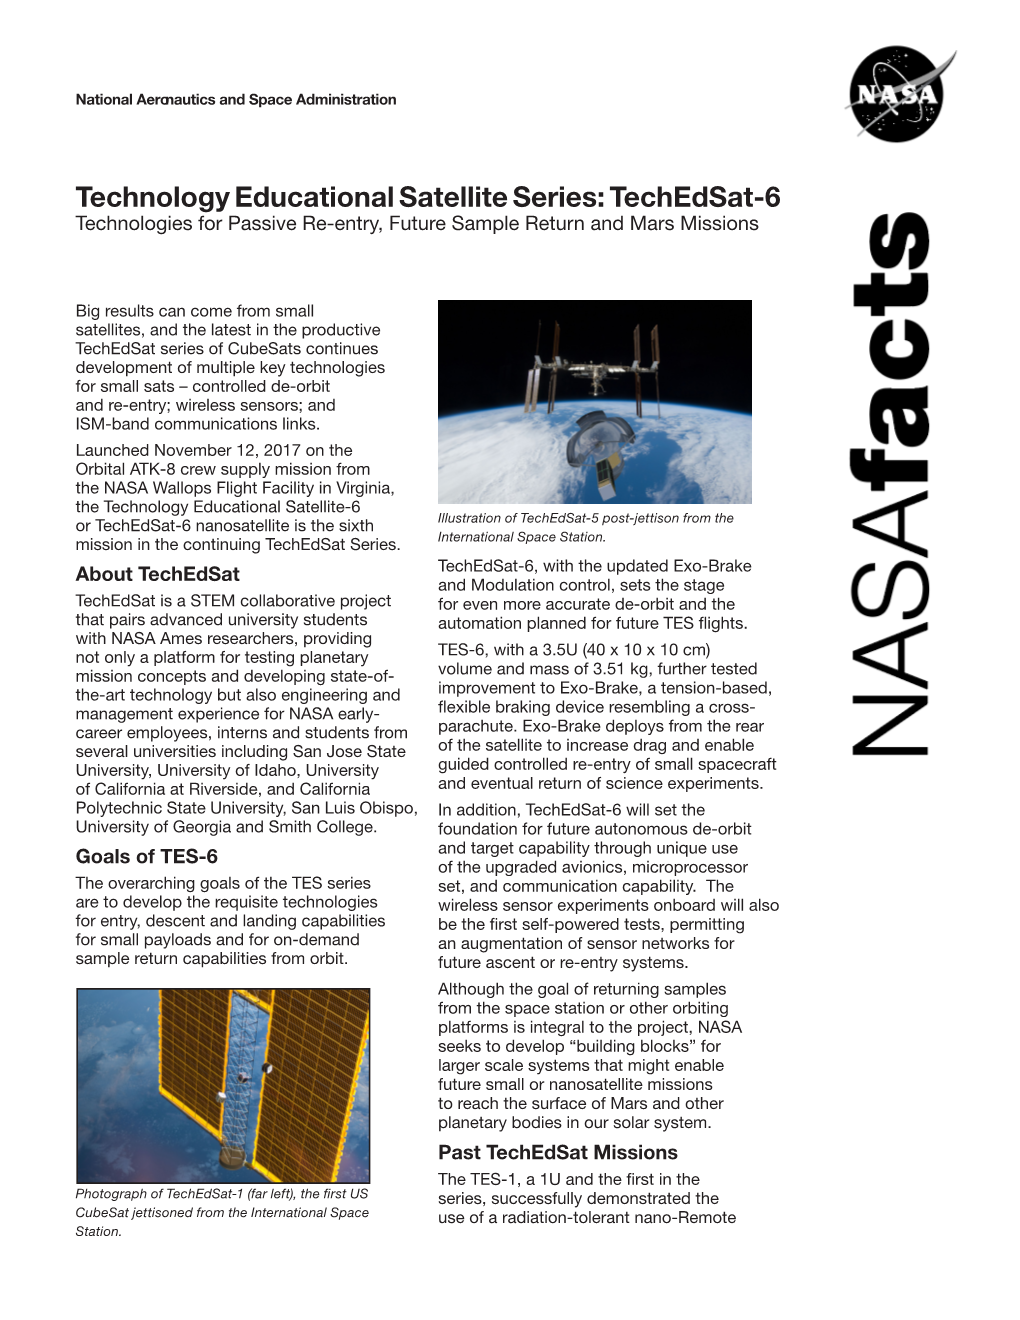 Techedsat-6 Technologies for Passive Re-Entry, Future Sample Return and Mars Missions